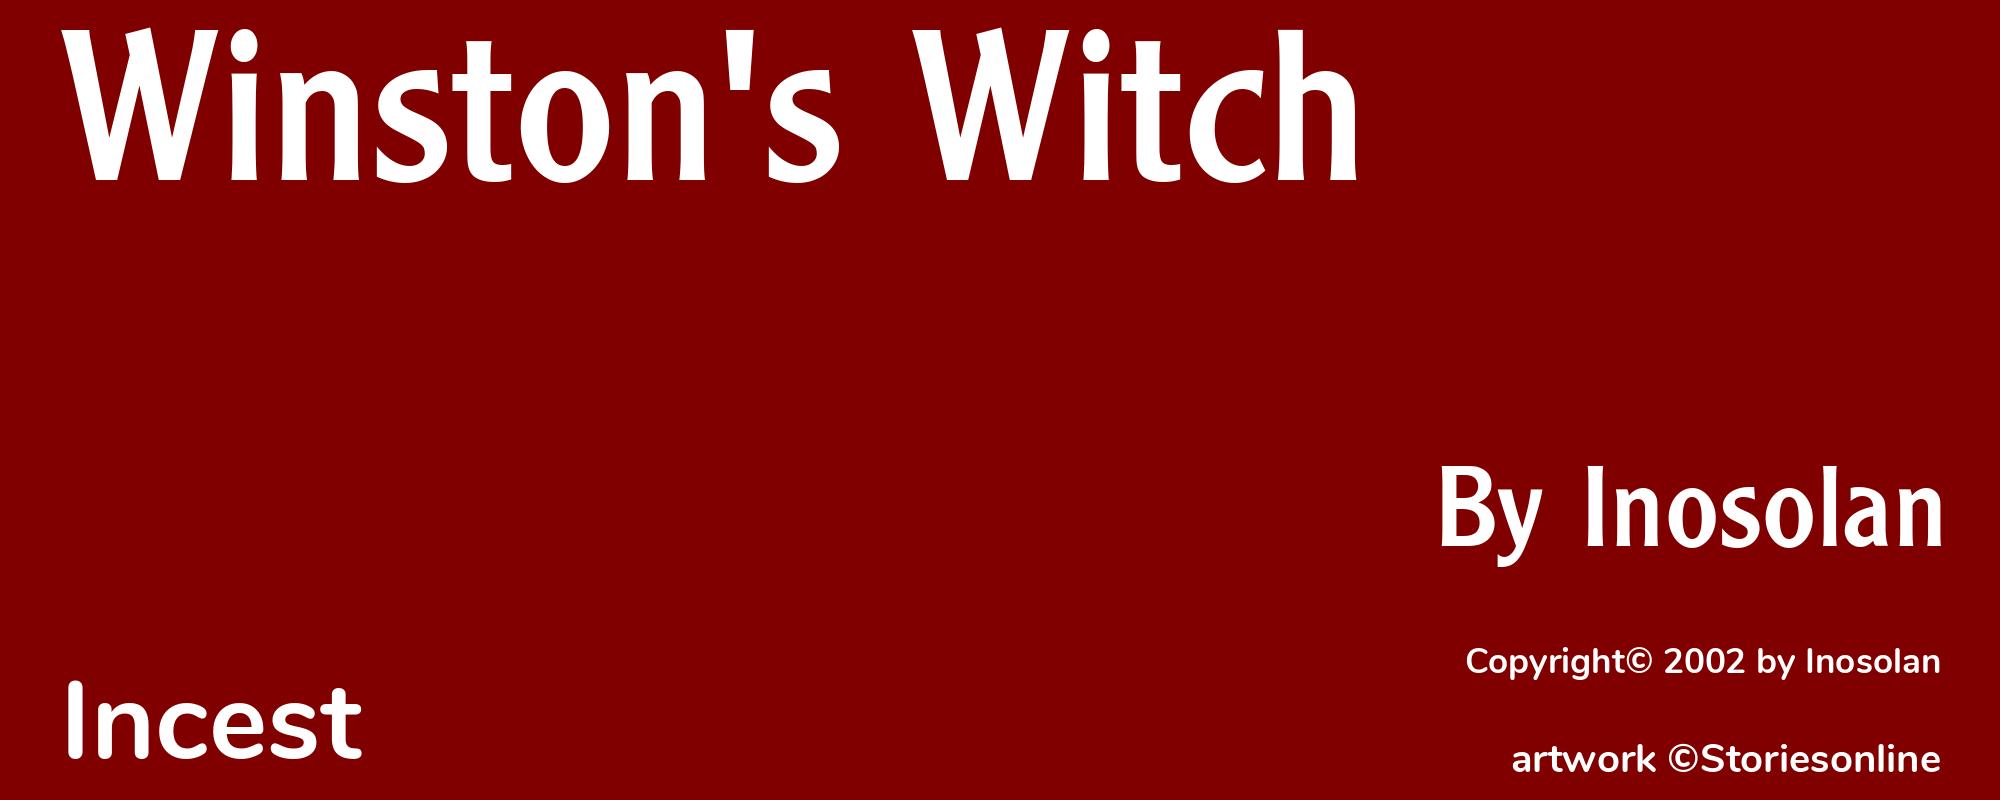 Winston's Witch - Cover